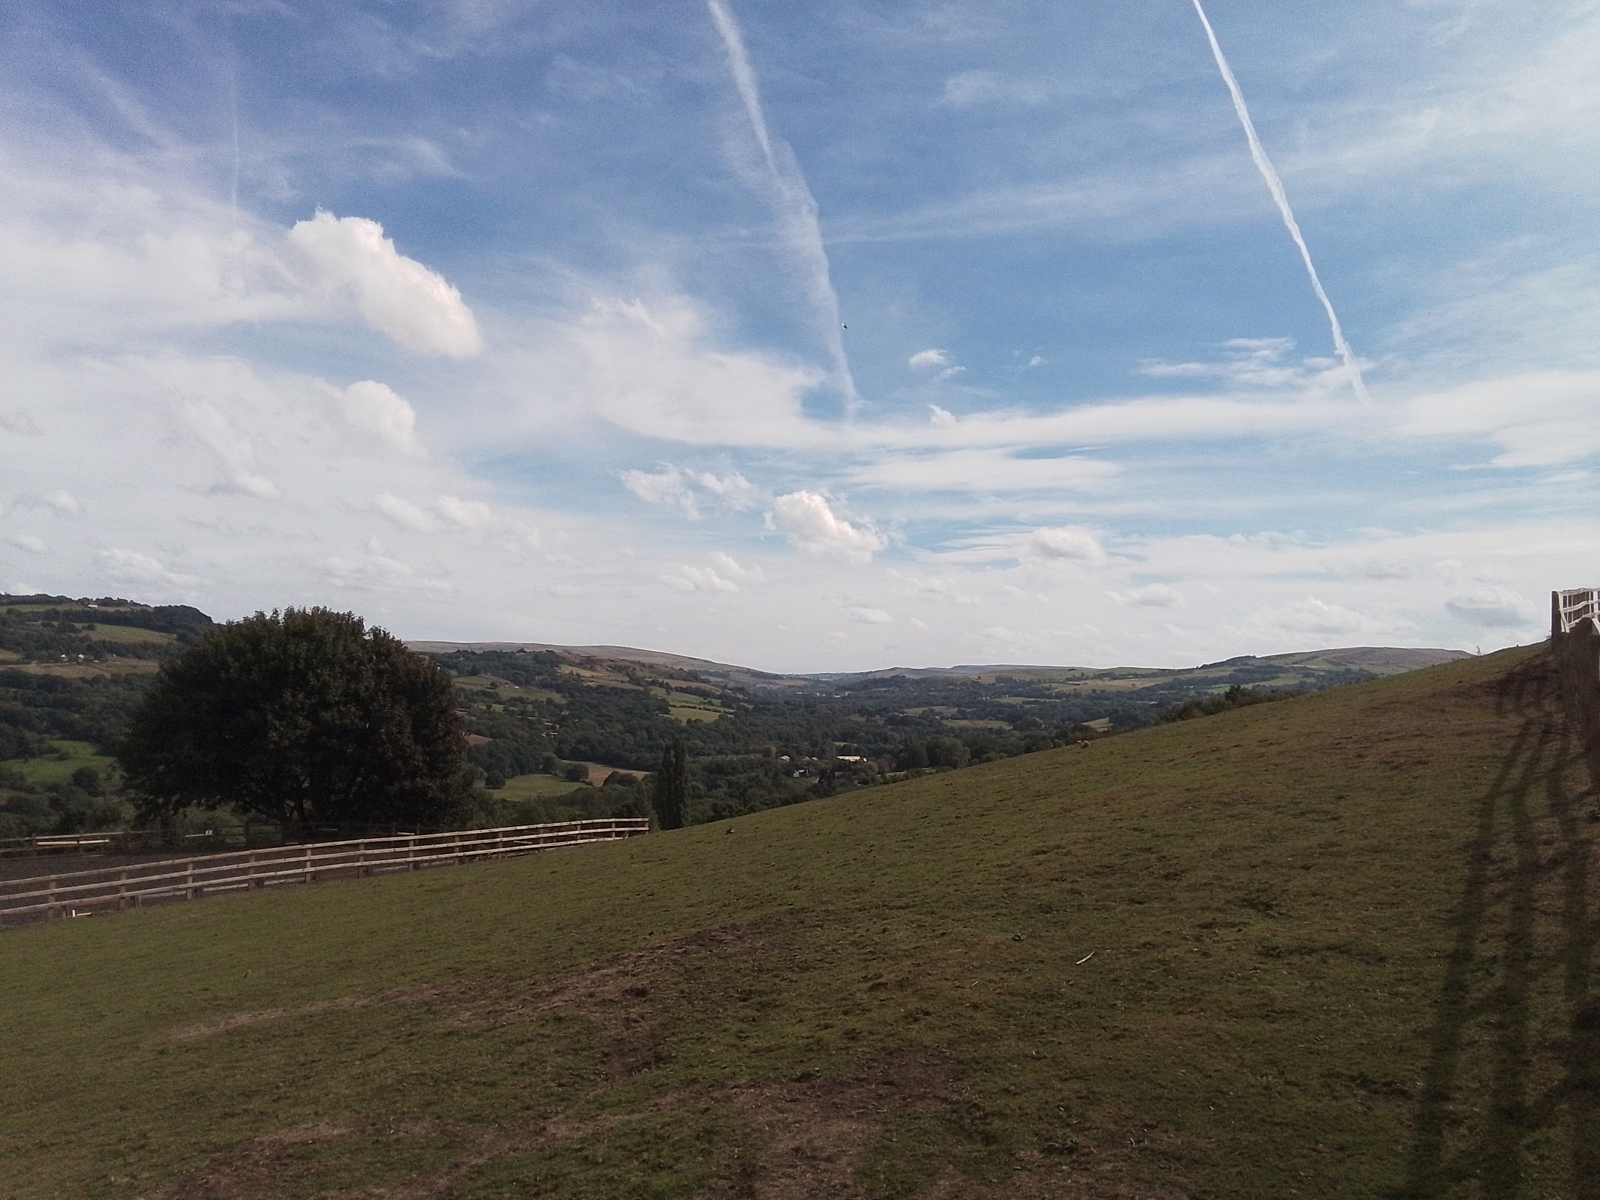 Nokia T10 camera sample showing a field and hills in daylight